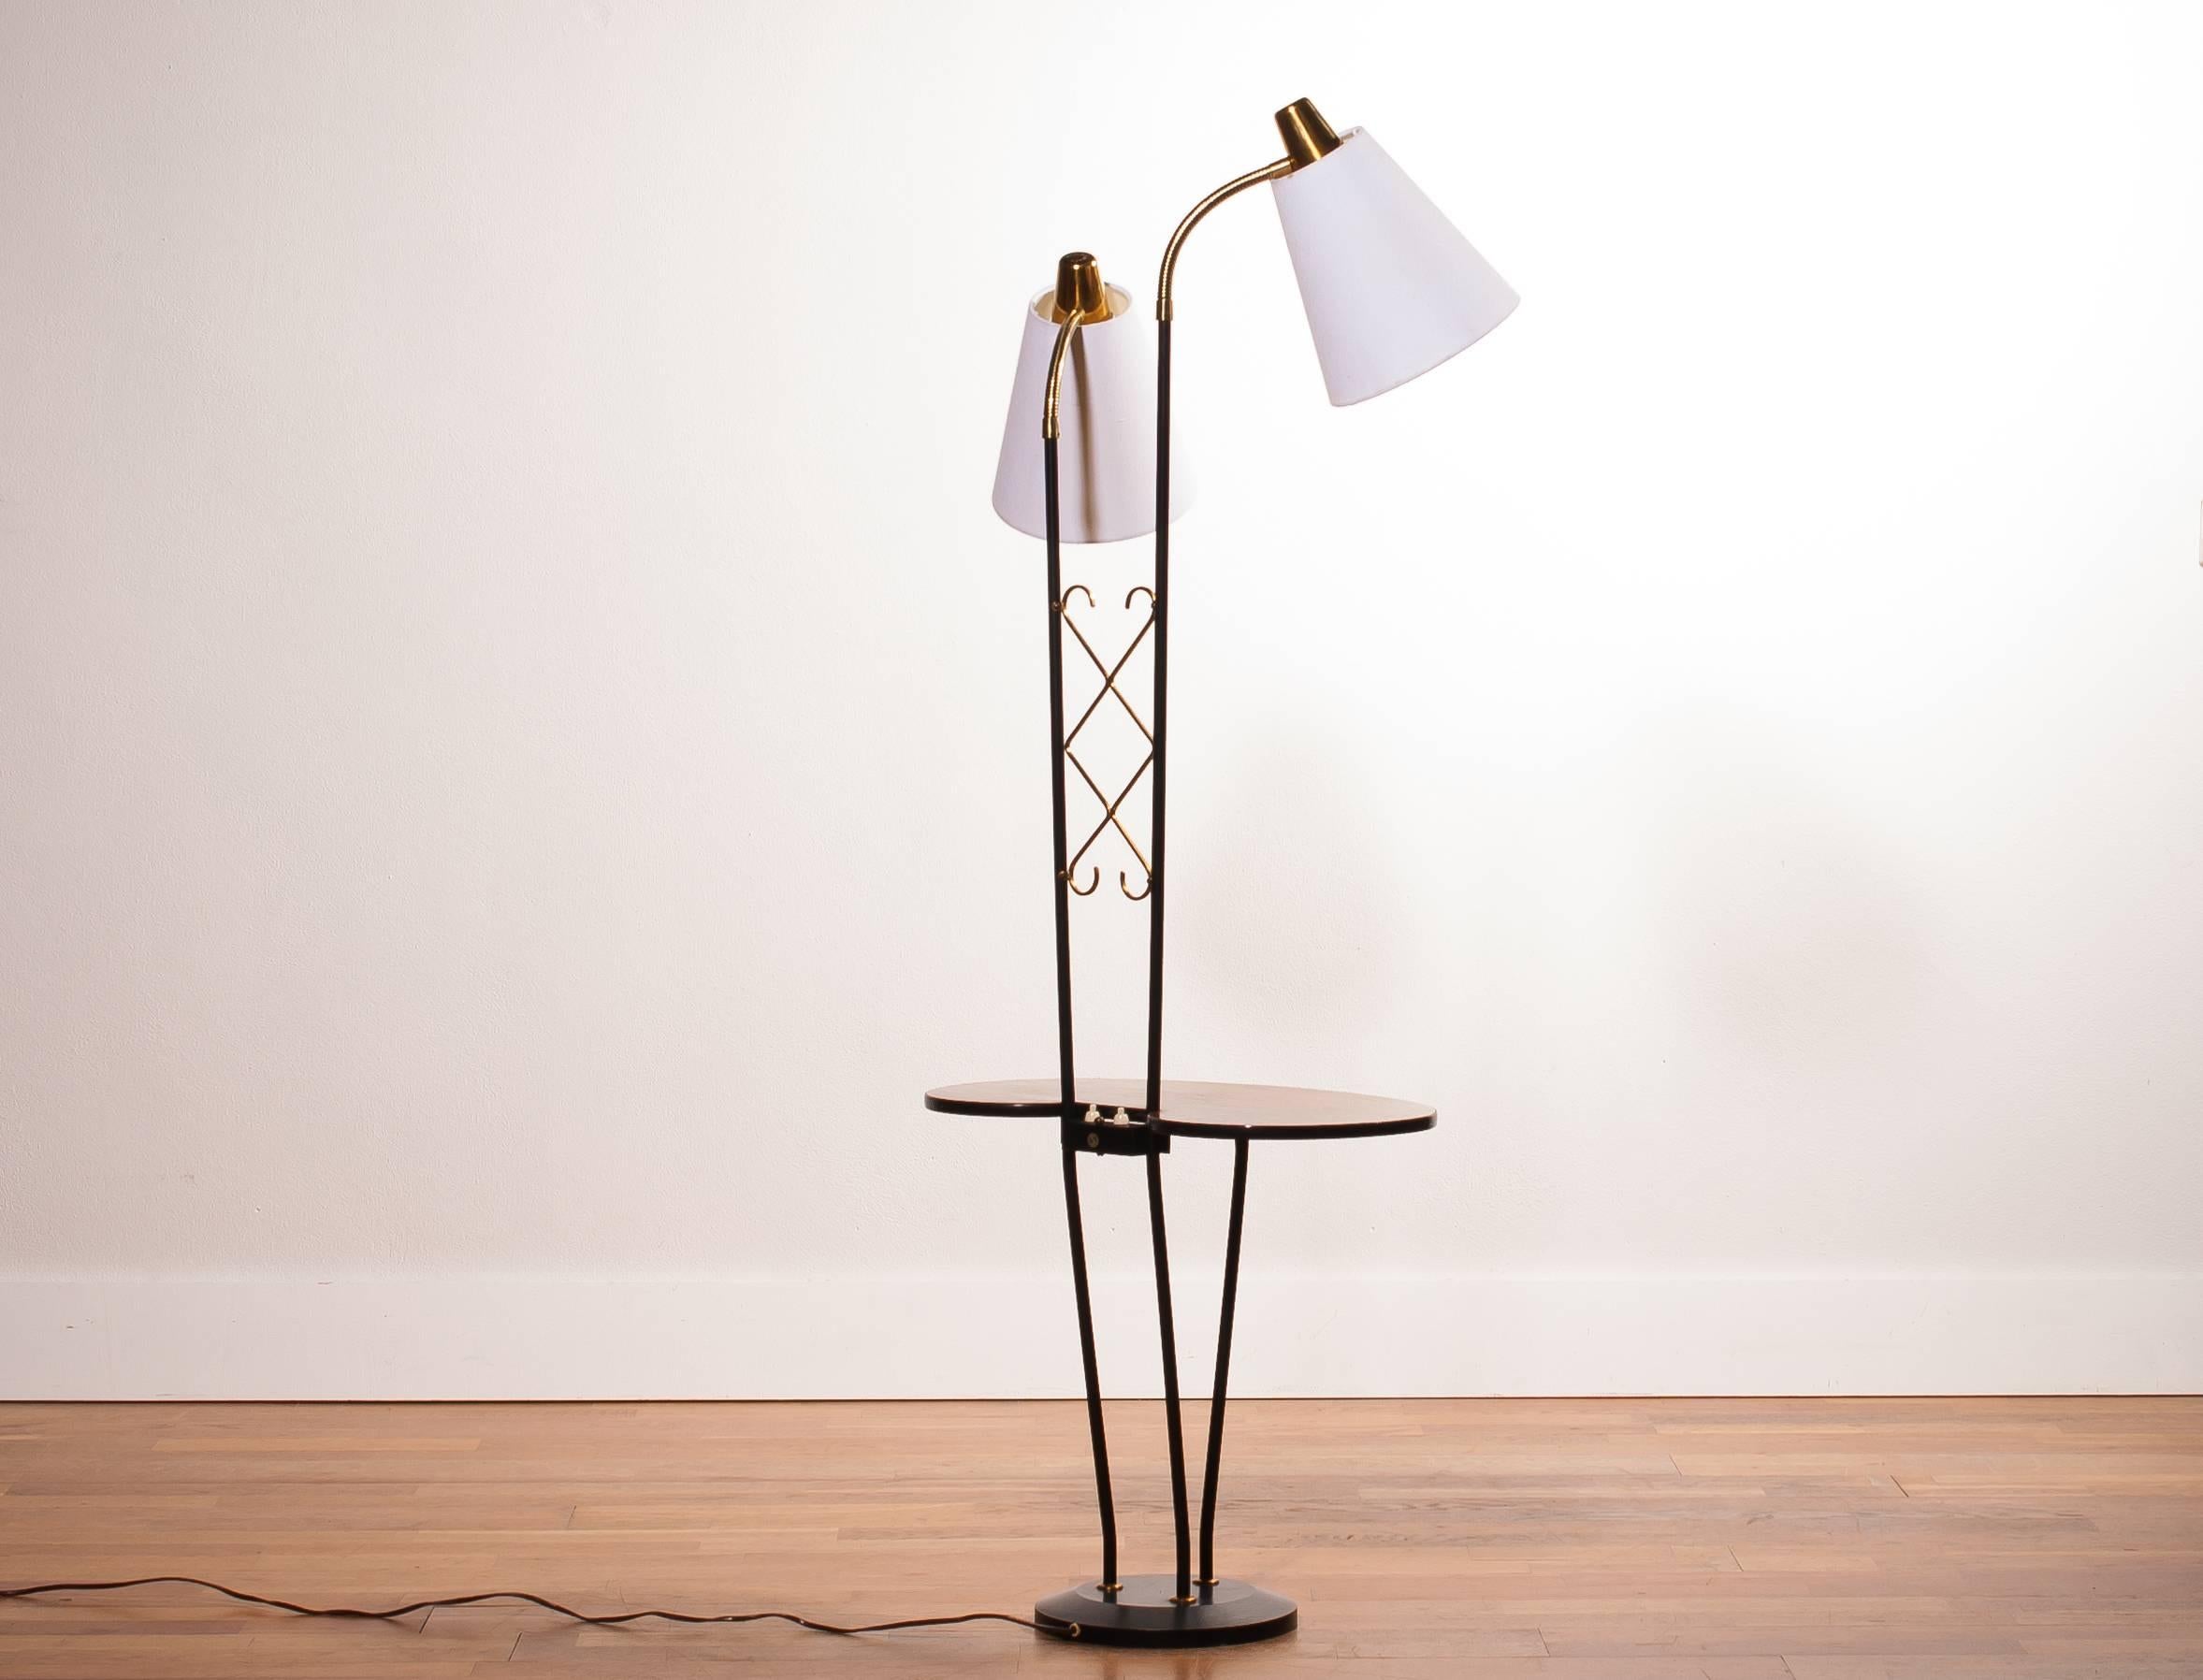 Beautiful floor lamp consistent two lamps and a table made in Sweden.
It features a metal black with brass frame, a teak table and two lamps with new white shades.
It is in a wonderful condition.
Period 1950s
Dimensions: H 150 cm, W 54 cm , D 33